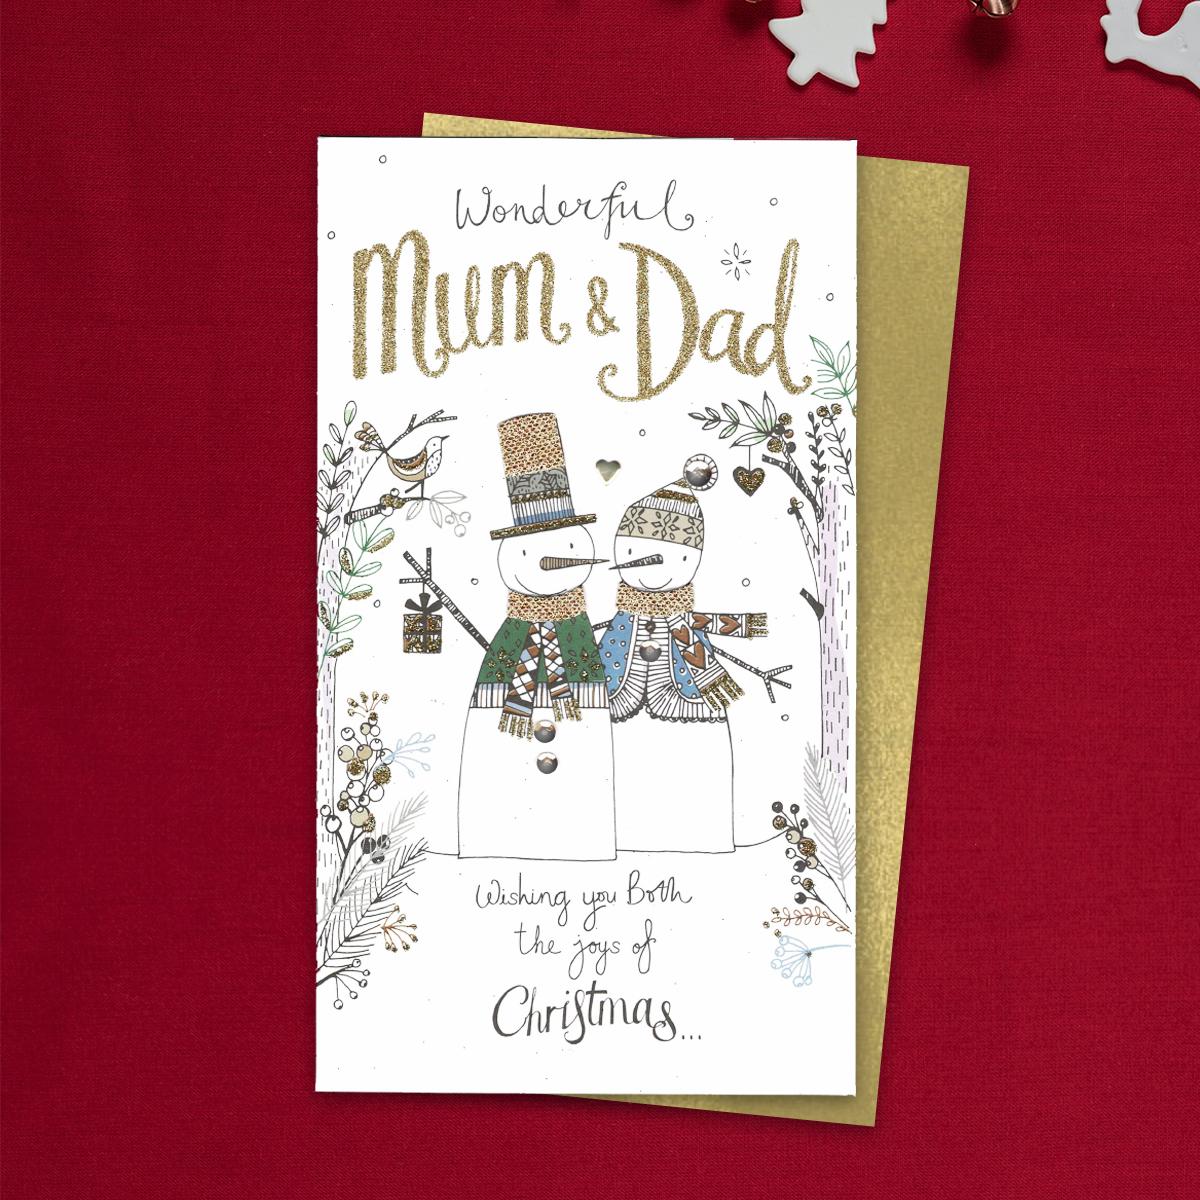 Wonderful Mum & Dad Card Featuring A Beautifully Decorated Snow Couple! Hand Finished With Decoupage And Sequin Embellishments. Complete With Gold Envelope